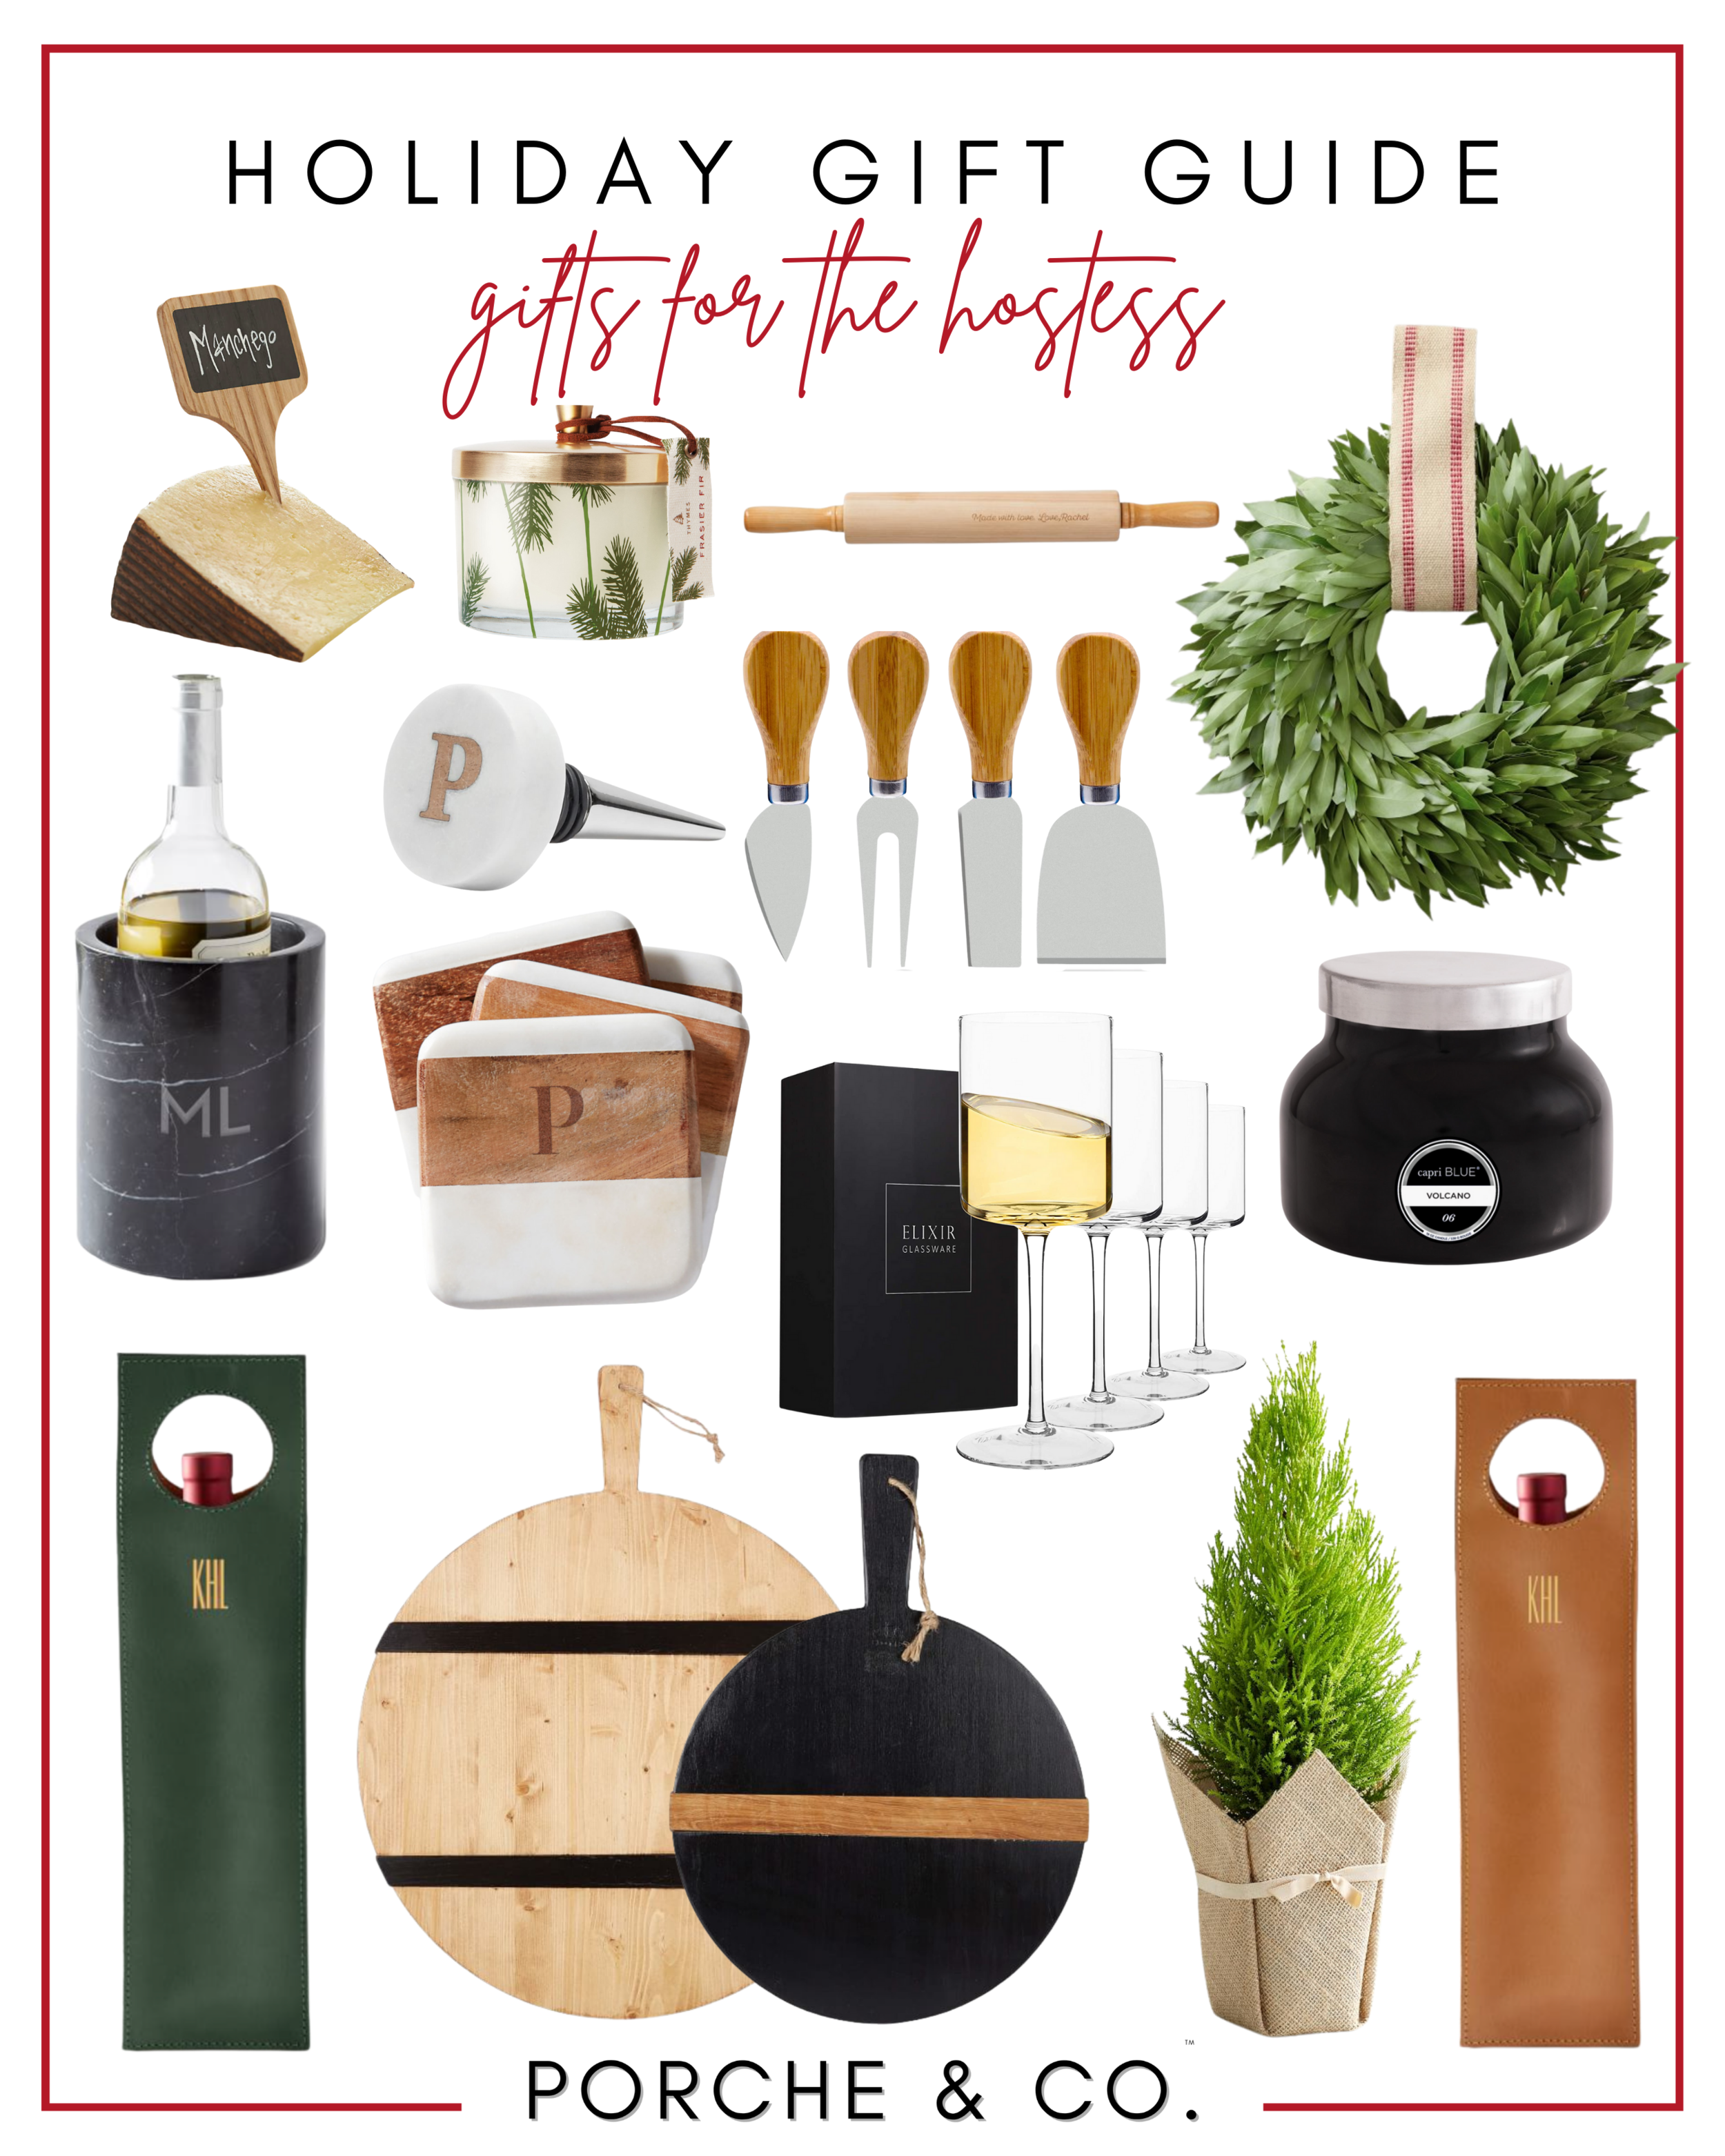 gifts for the hostess (Copy) (Copy) (Copy)